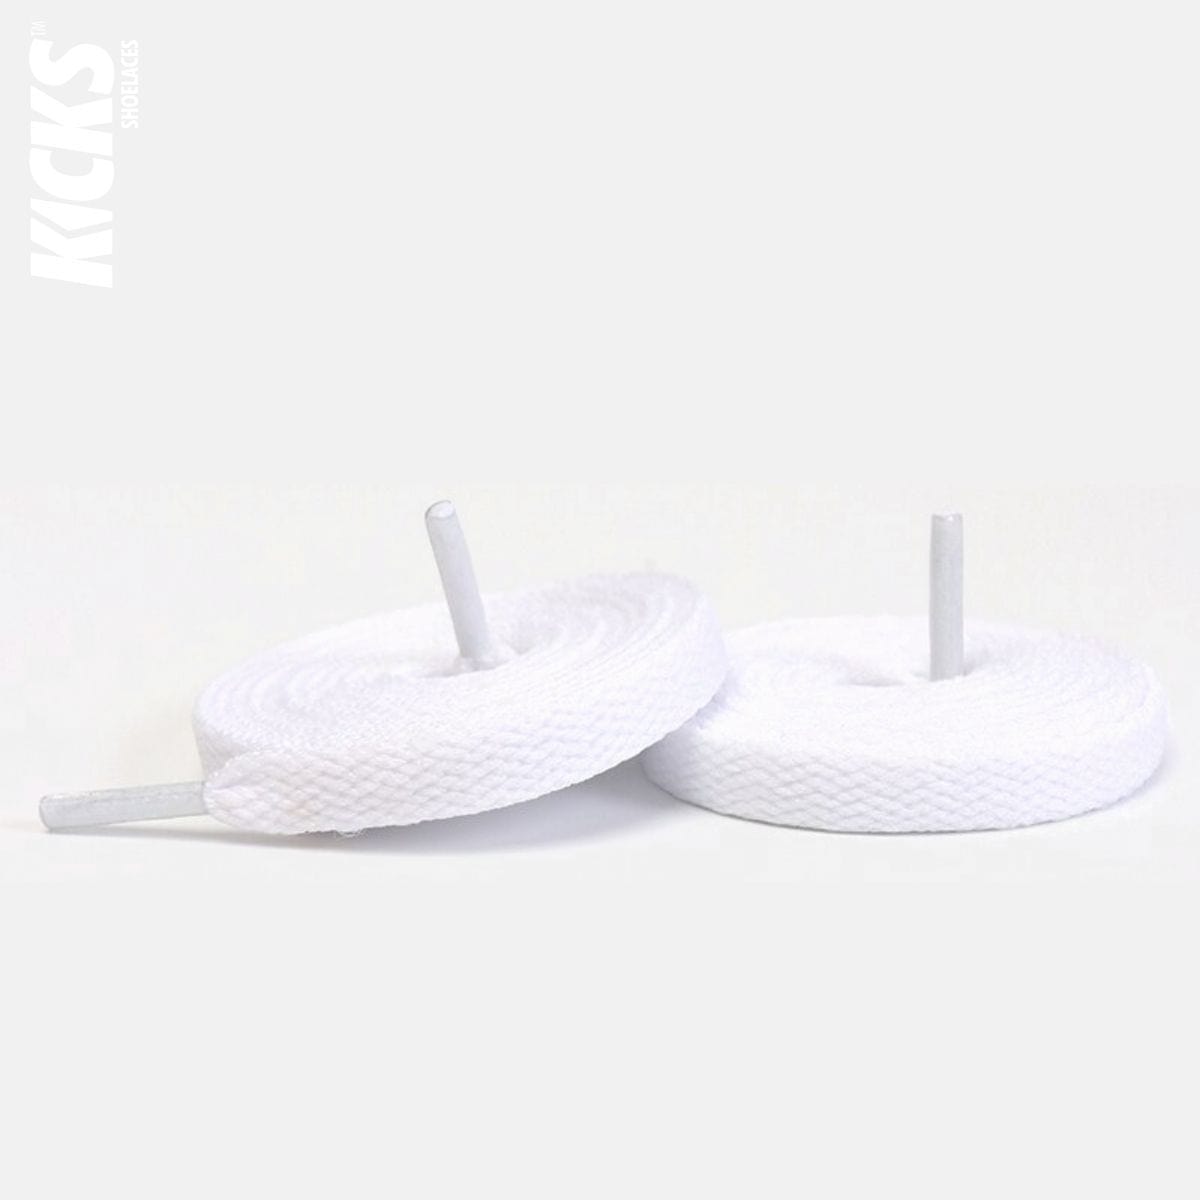 White Replacement Converse Laces for Converse All Star Sneakers by Kicks Shoelaces